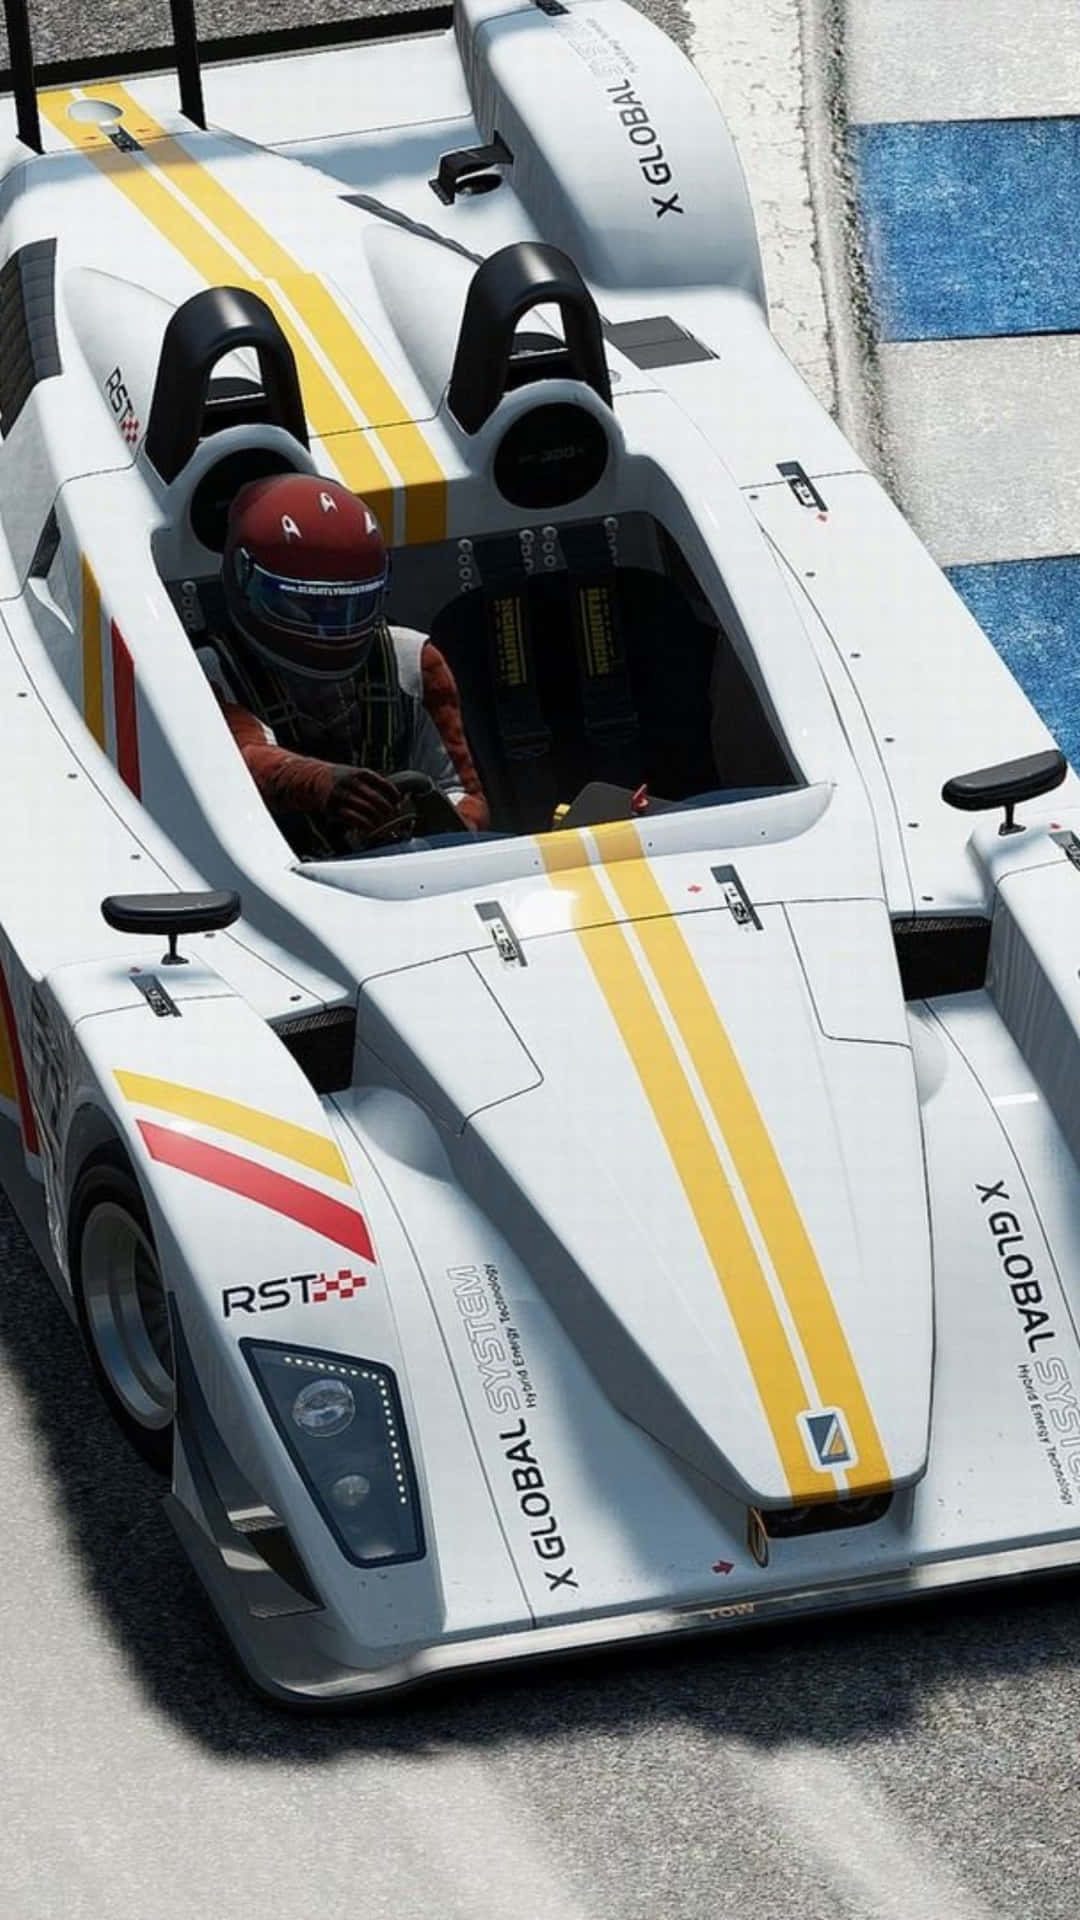 "Be the king of the streets with Android Project Cars"